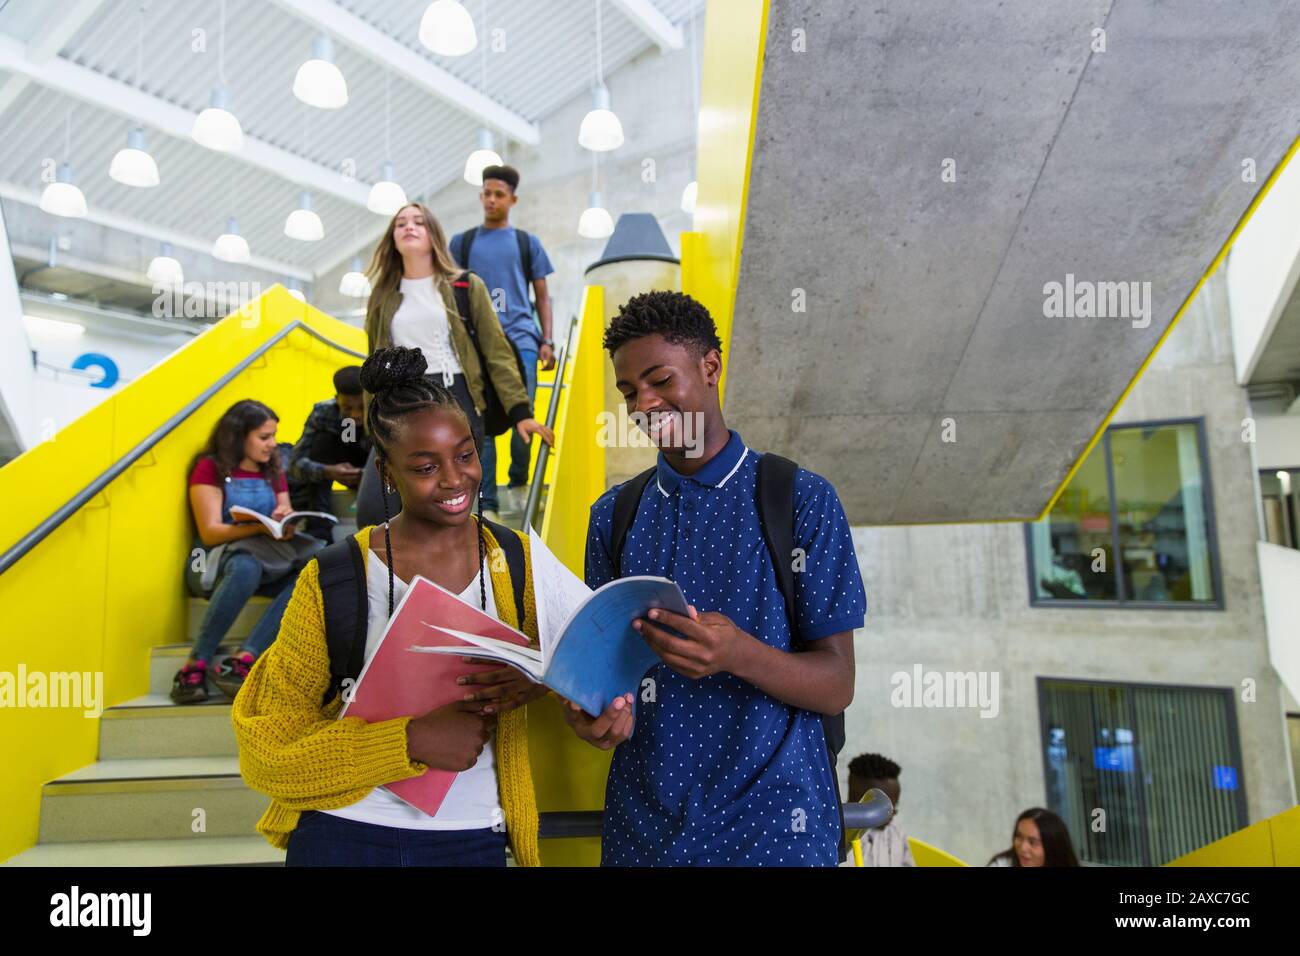 Junior high students studying at stairs Stock Photo